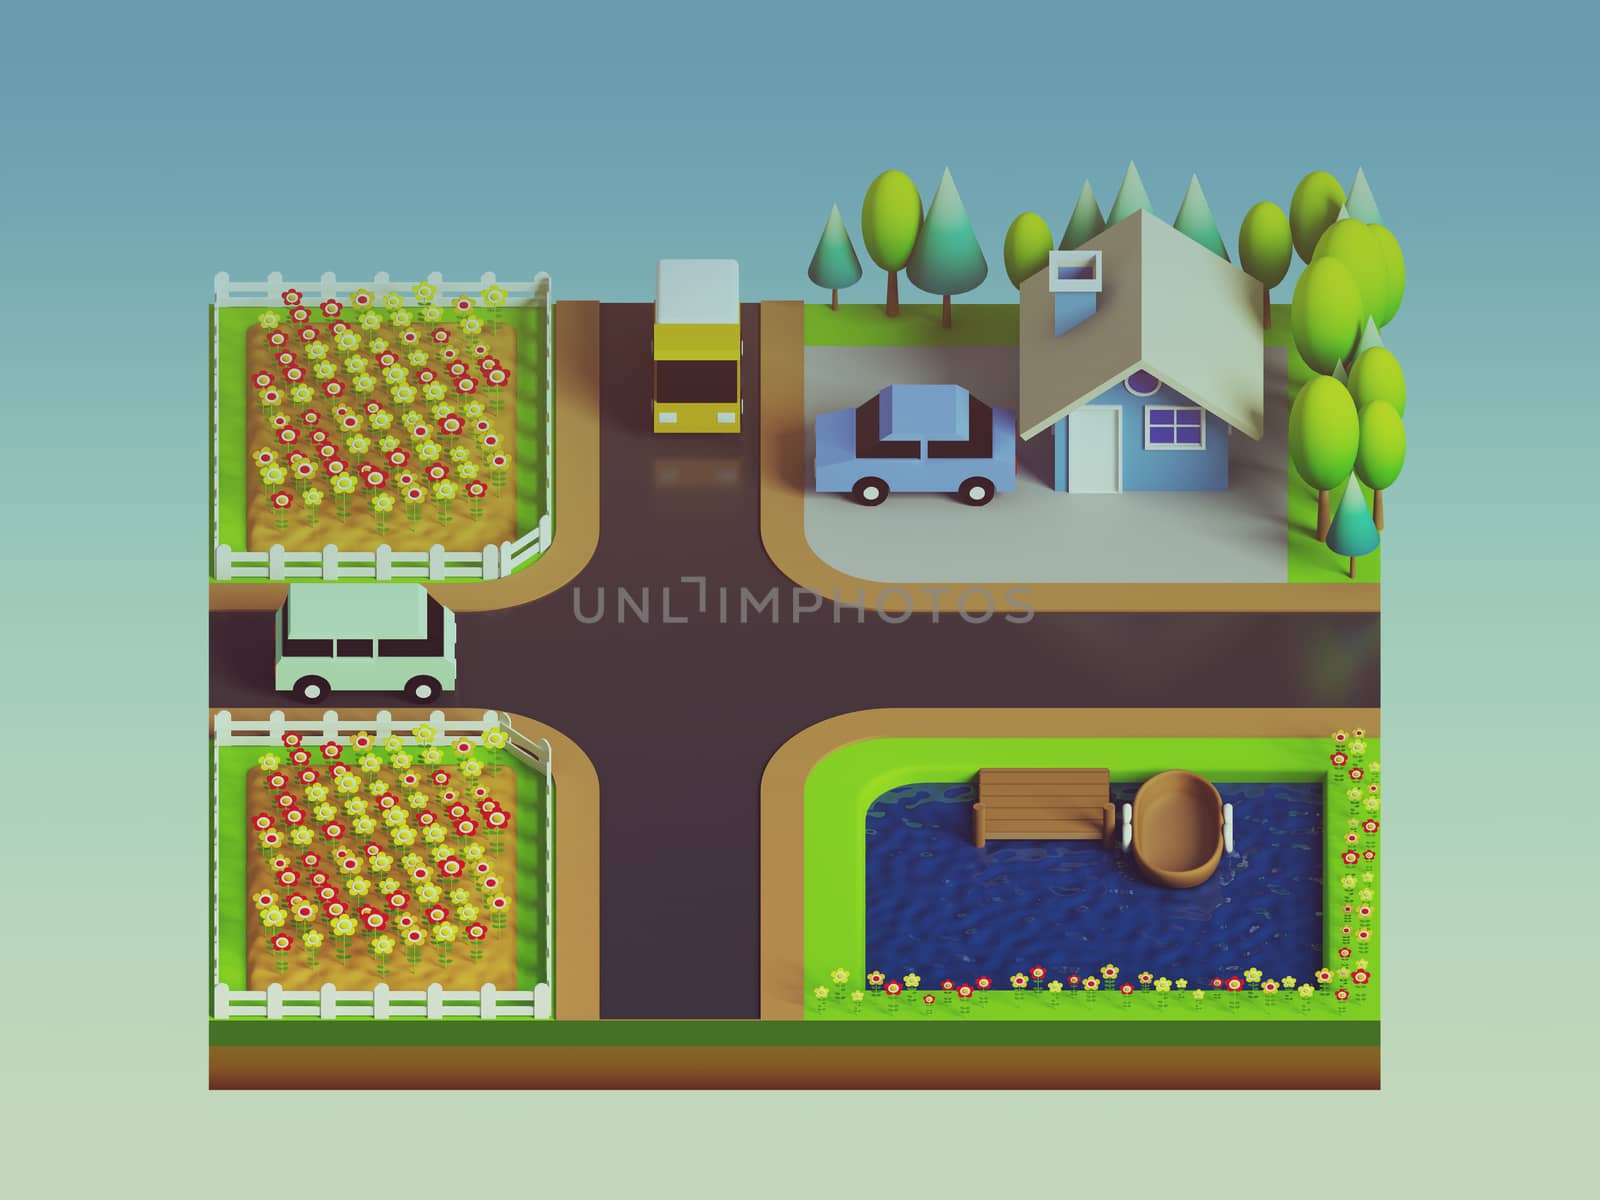 green earth concept in isometric view